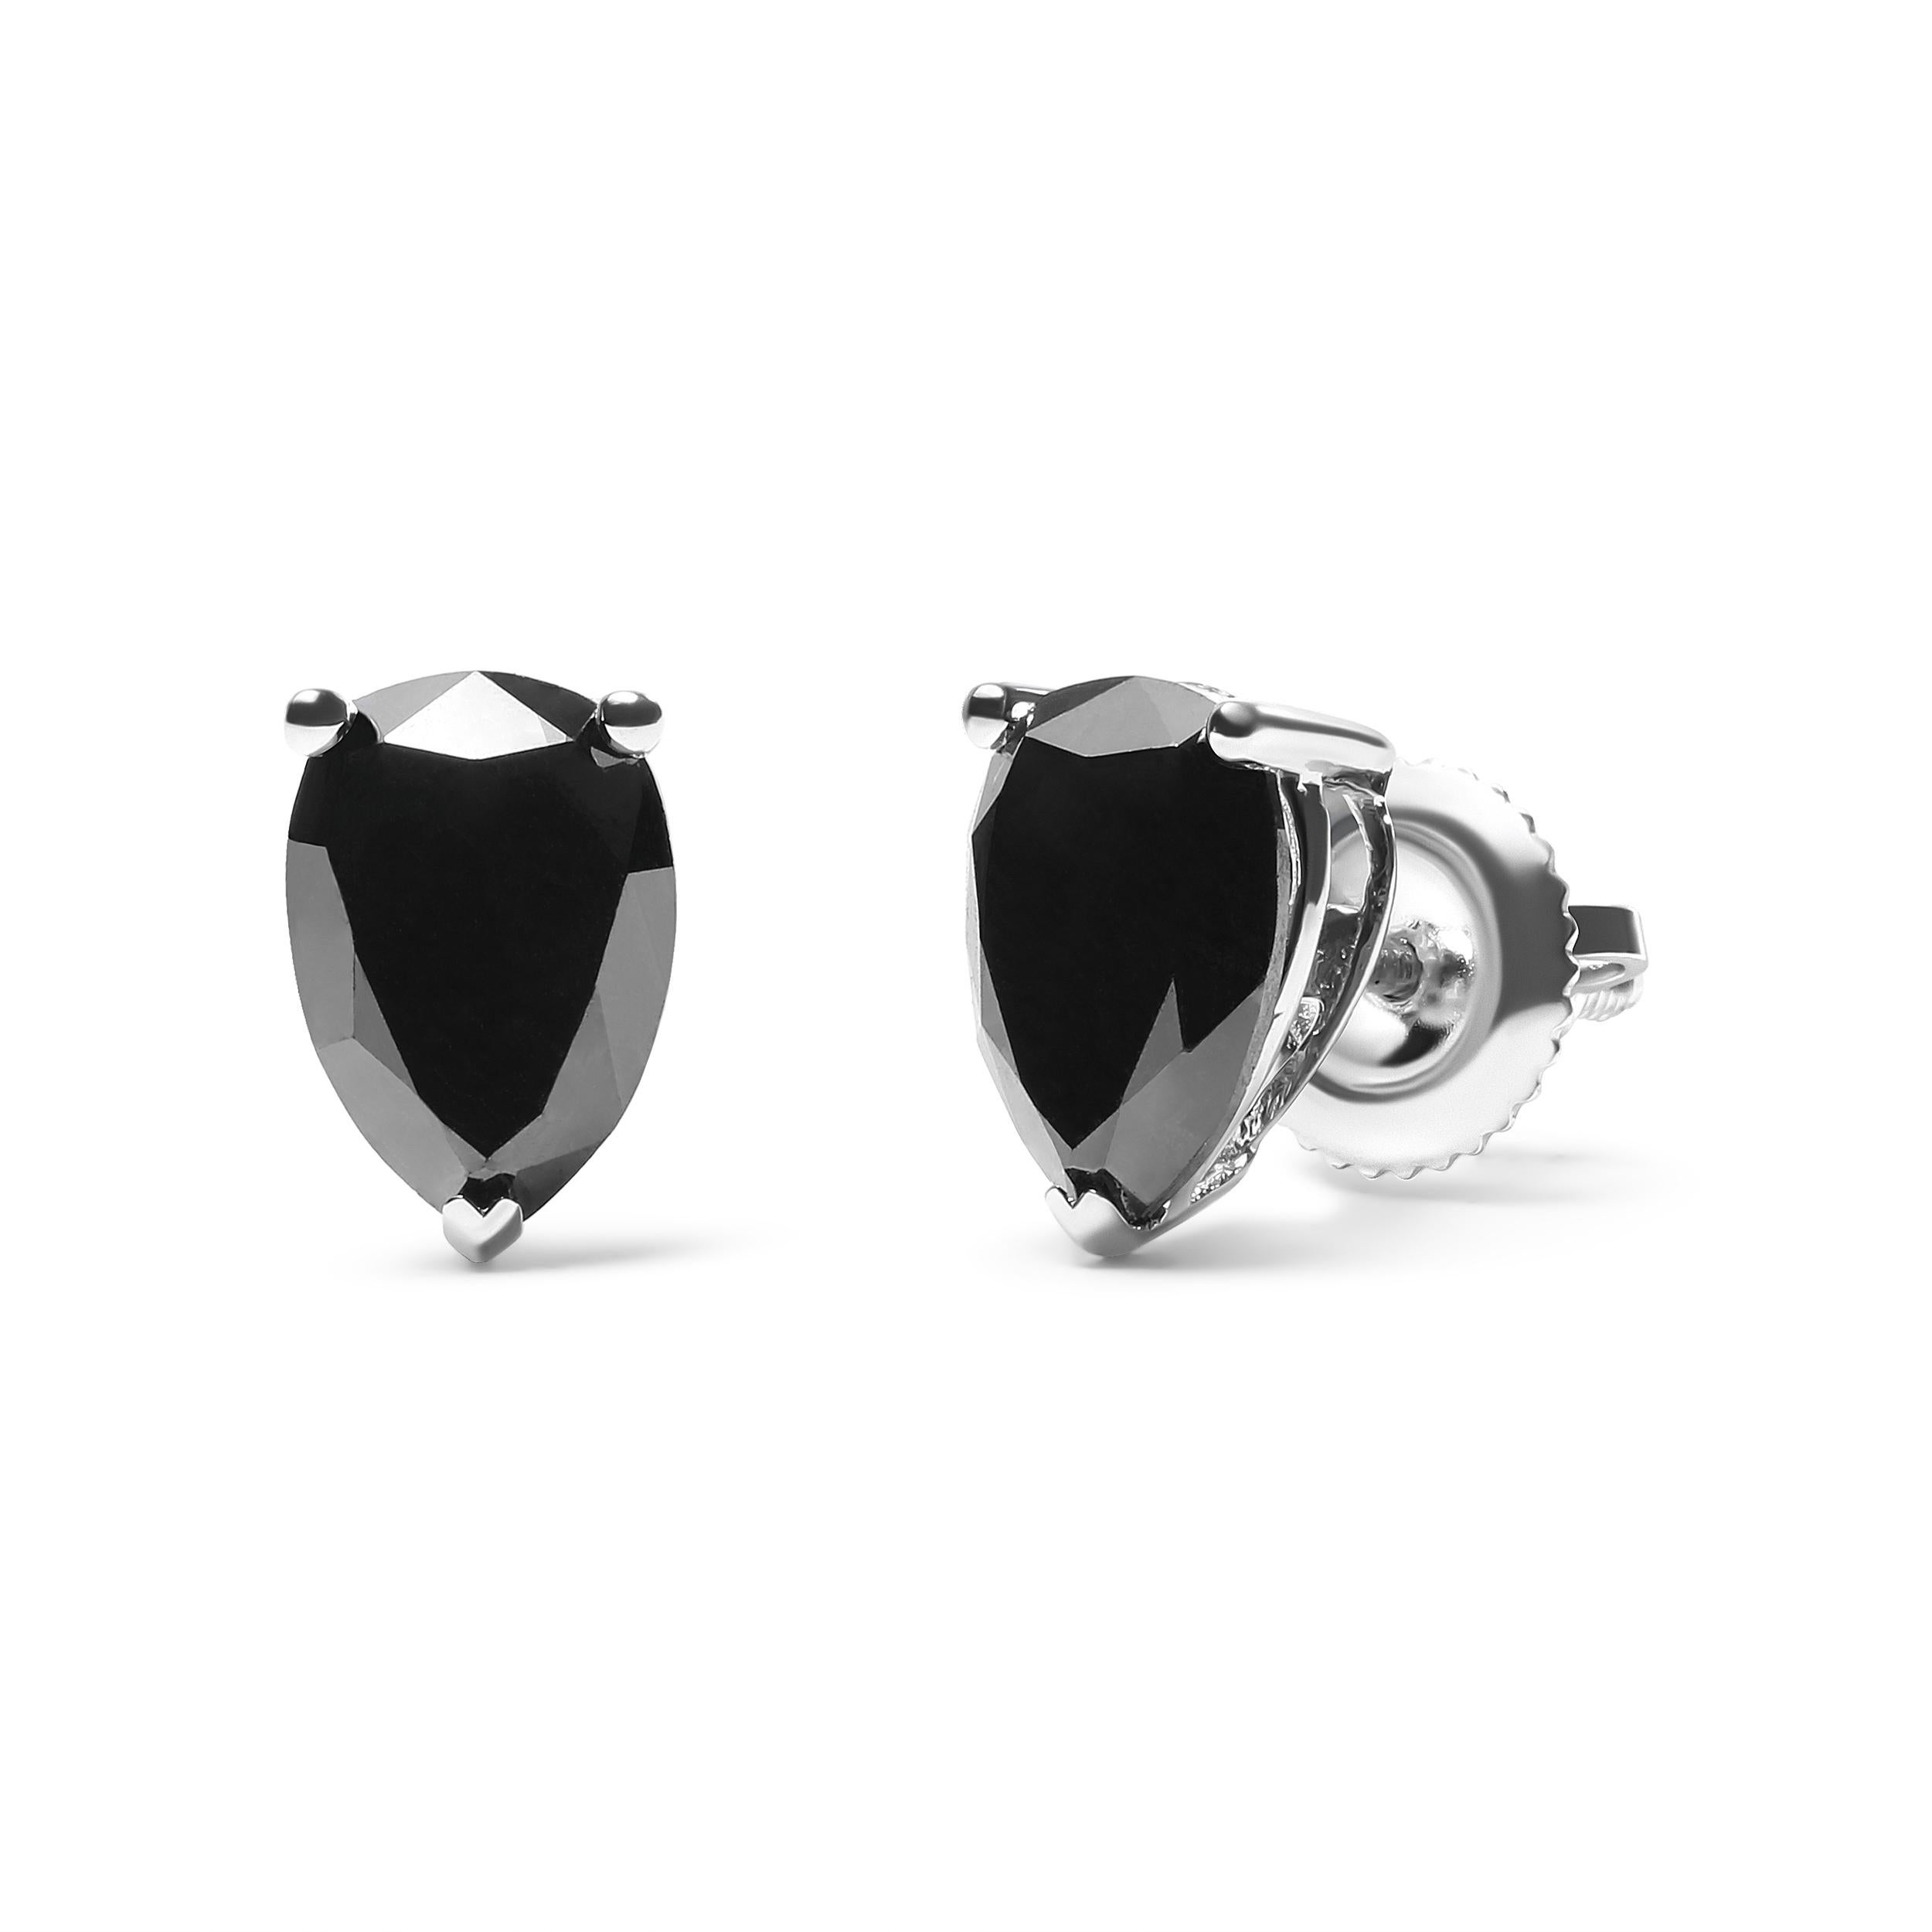 These gorgeous natural diamond solitaire earrings are a classic and timeless design that will be one of your favorite looks to wear. Pear-shaped color treated black diamonds dazzle with faceted splendor from 3-prong settings, totaling 1/2 cttw and